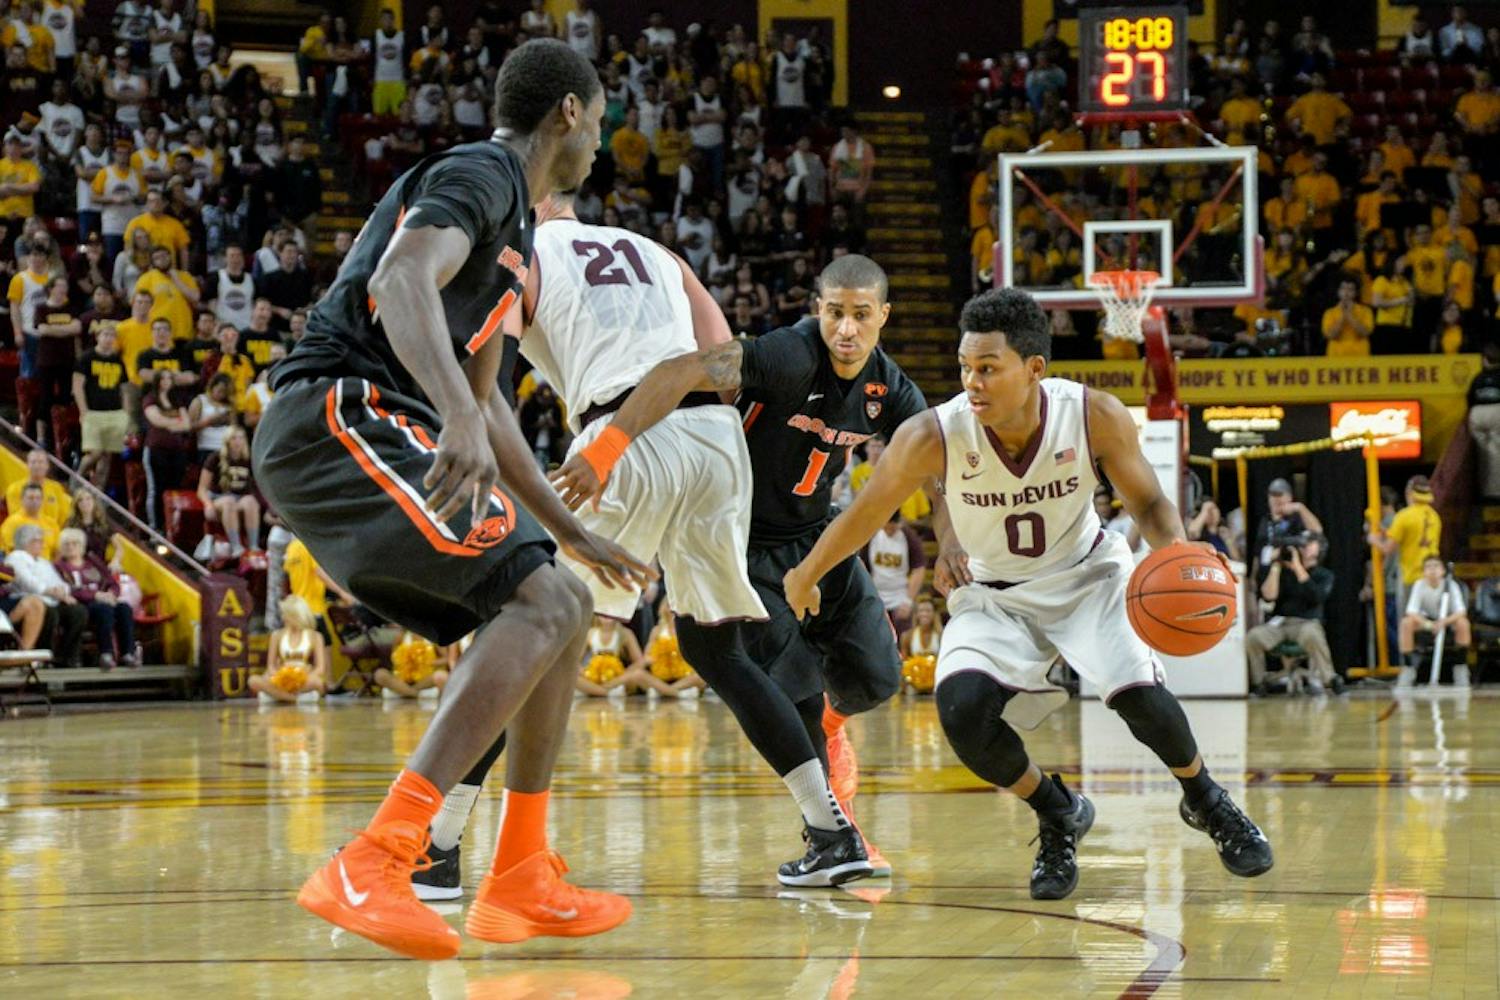 Freshman guard Tra Holder takes on the Oregon State Beavers defense on Wednesday, Jan. 28, 2015, at Wells Fargo Arena. The Sun Devils went on to win the game against OSU. (J. Bauer-Leffler/The State Press)